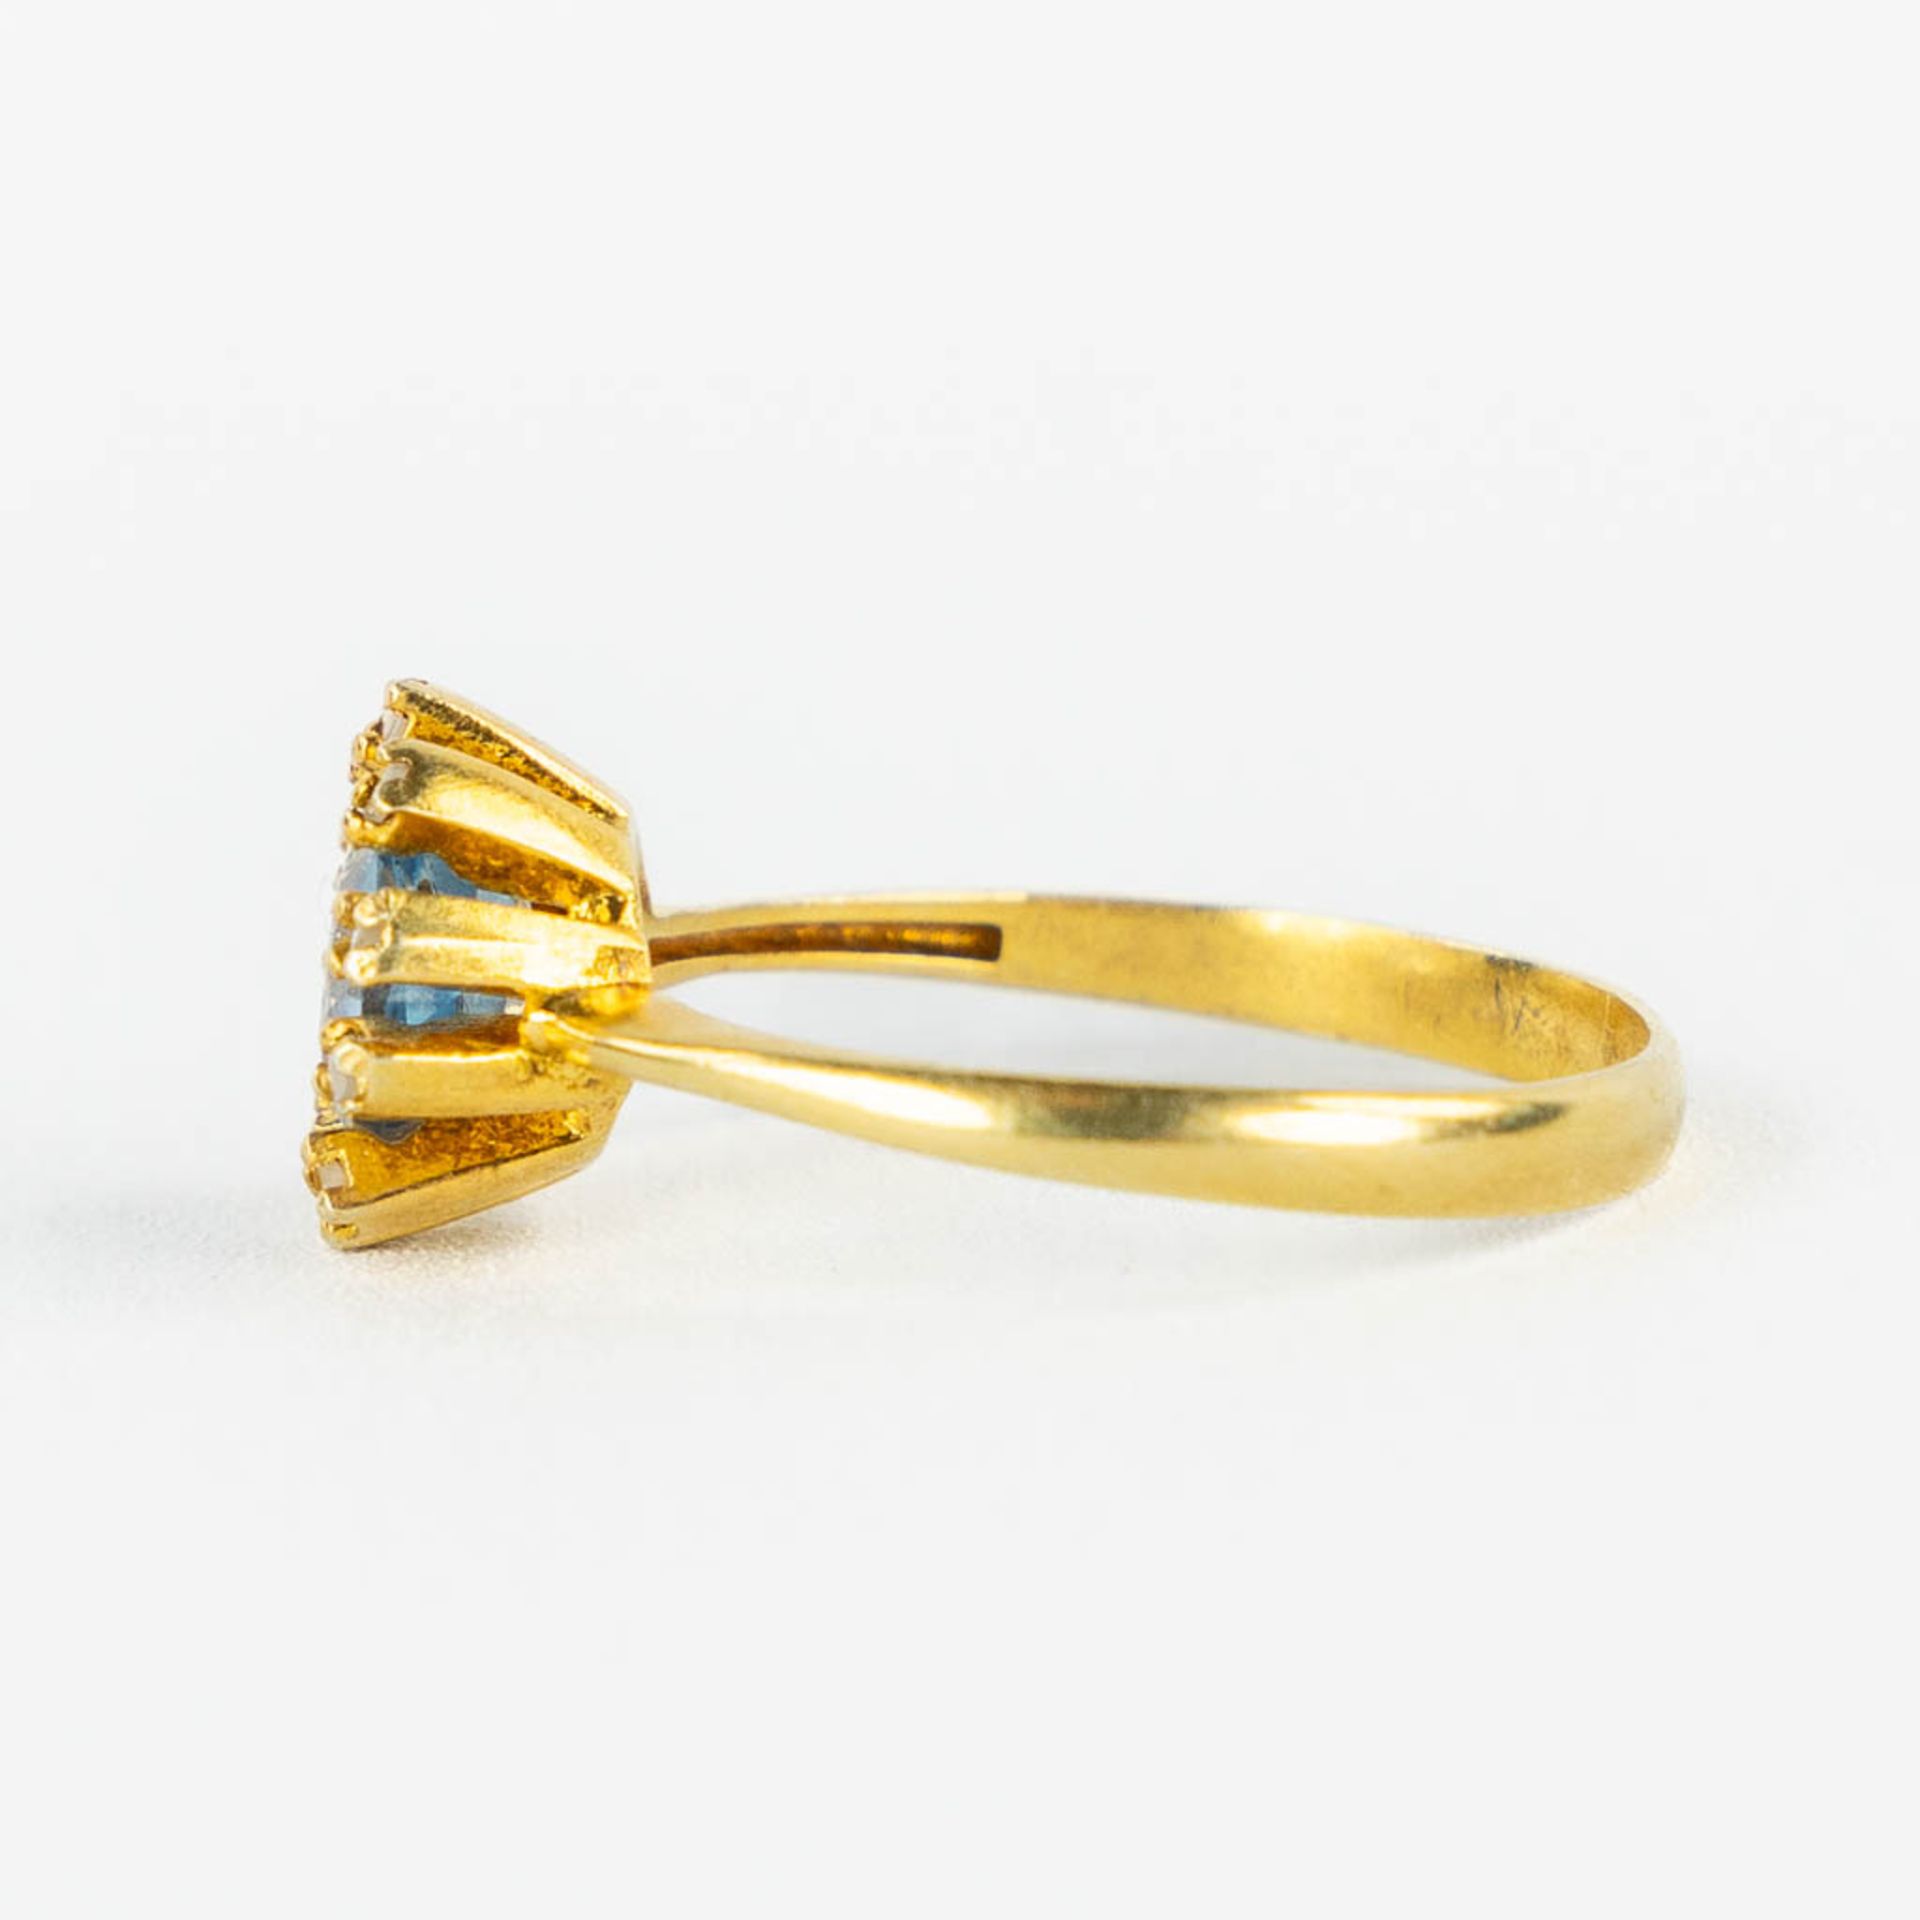 A ring, gilt silver with a cut topaaz, old cut diamonds. 2,48g. Ring size 59. - Image 8 of 9